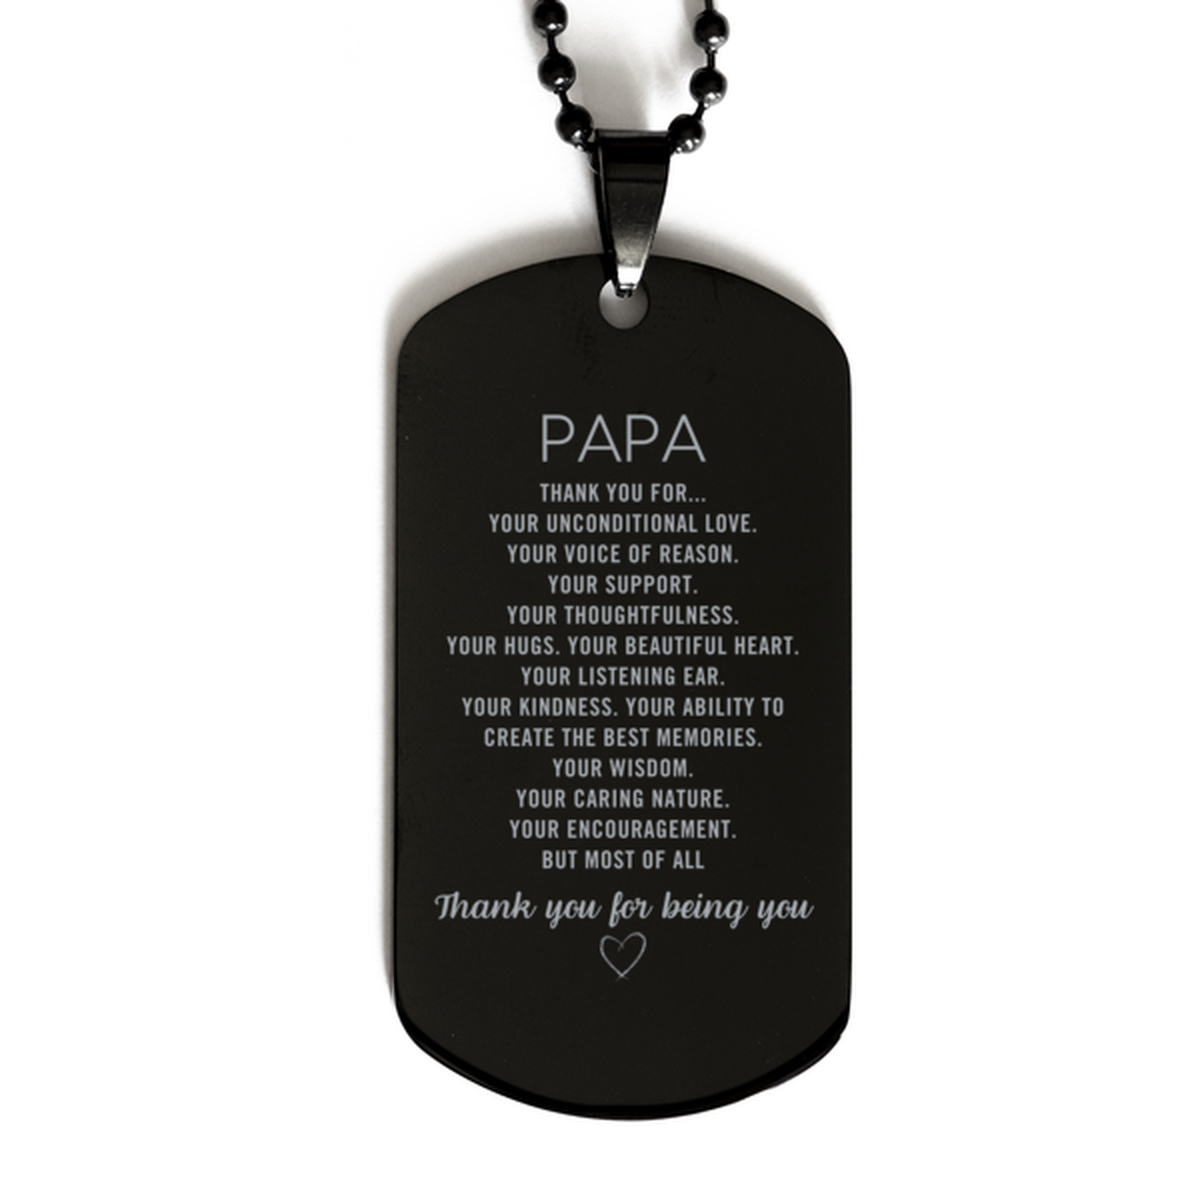 Papa Black Dog Tag Custom, Engraved Gifts For Papa Christmas Graduation Birthday Gifts for Men Women Papa Thank you for Your unconditional love